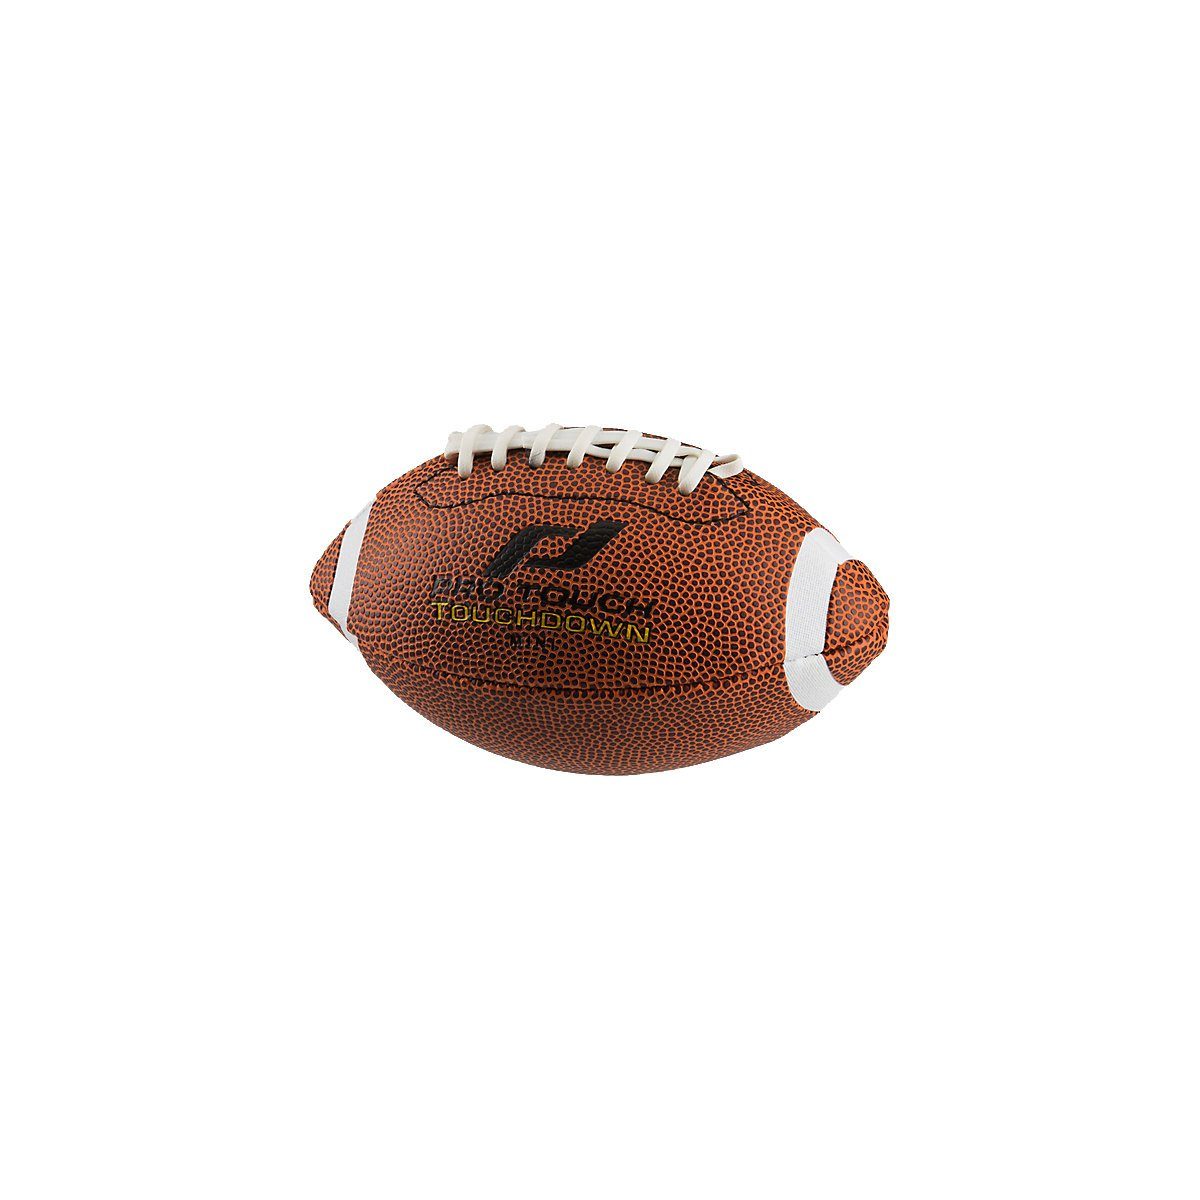 Pro Touch Touchdown American Football Ball Unisex Adulto 